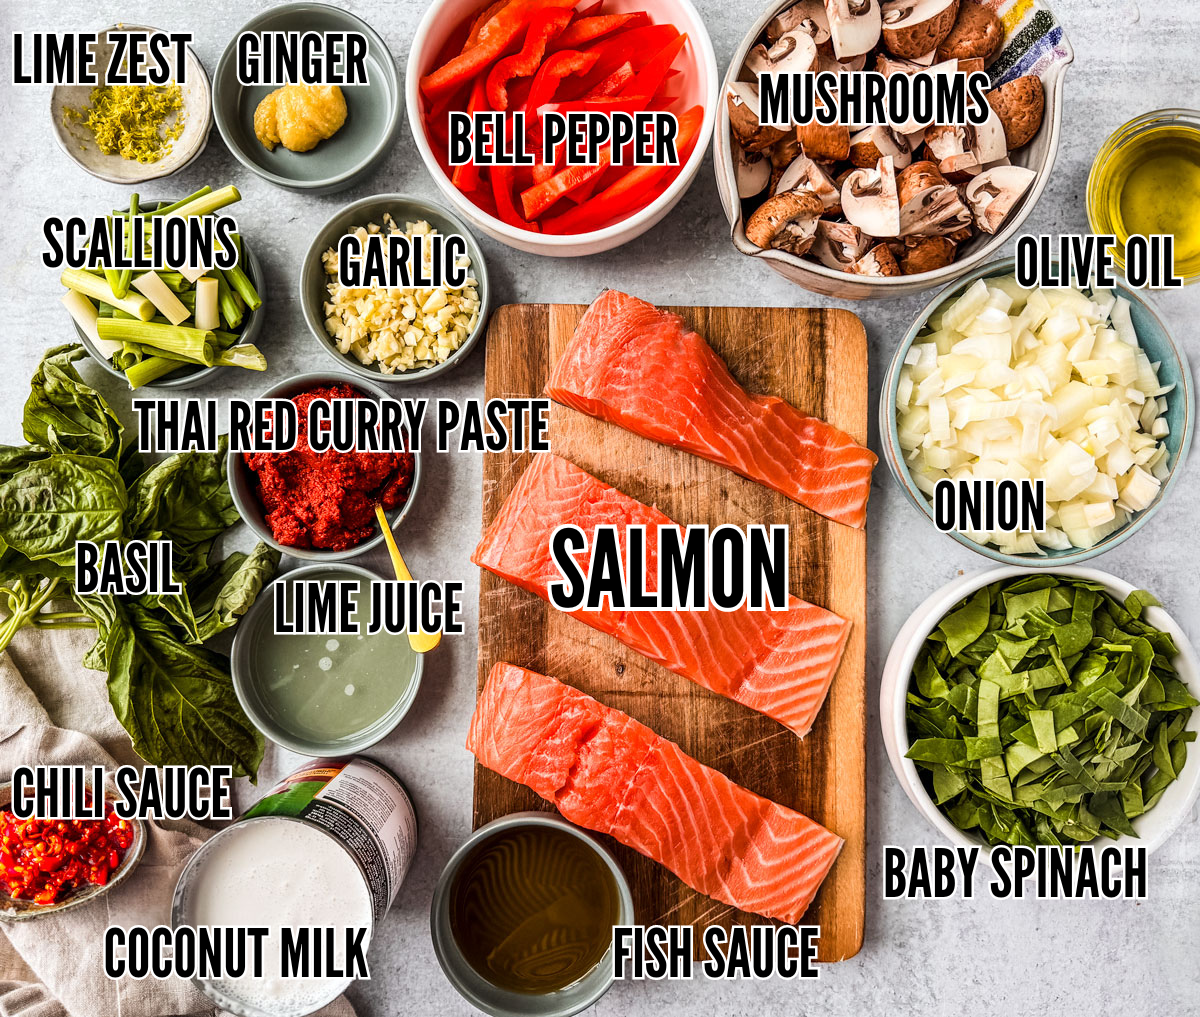 The ingredients for curry salmon laid out on a light background.